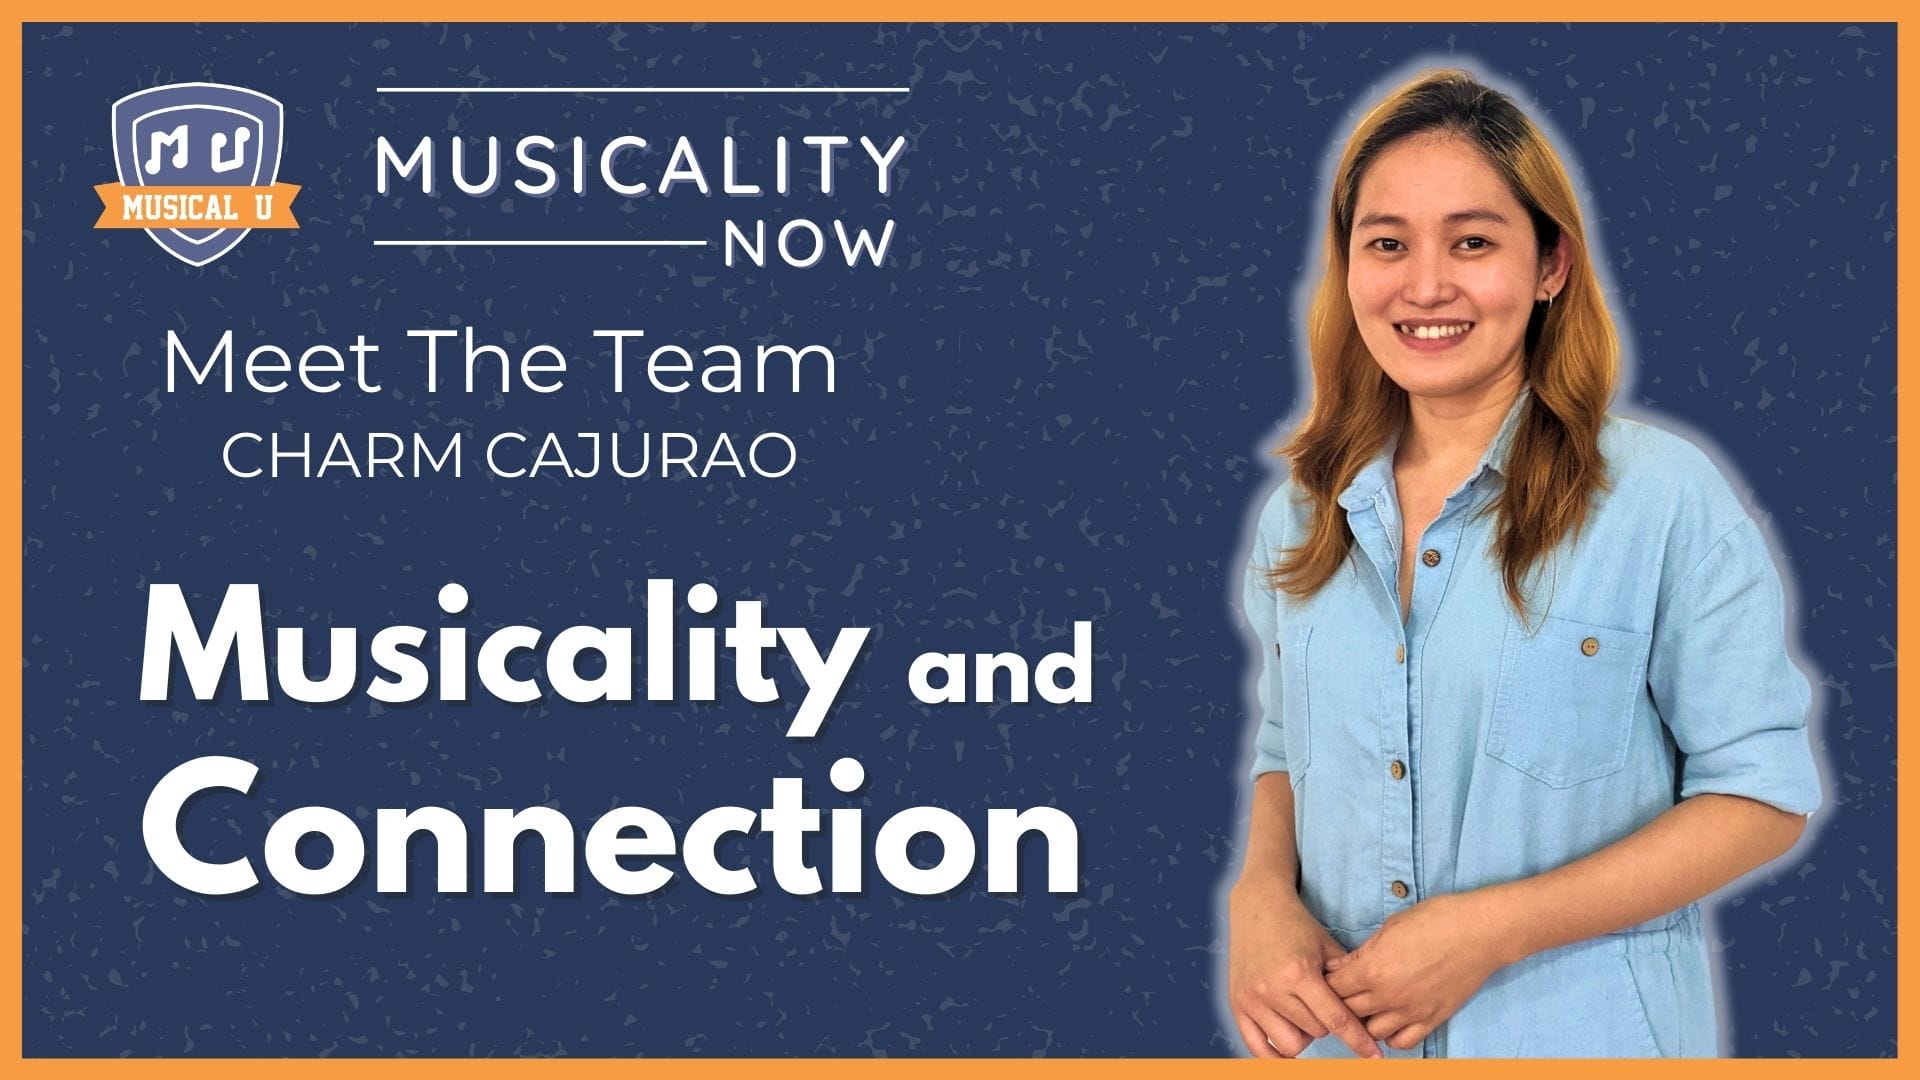 Musicality and Connection (Meet the Team with Charm Cajurao)